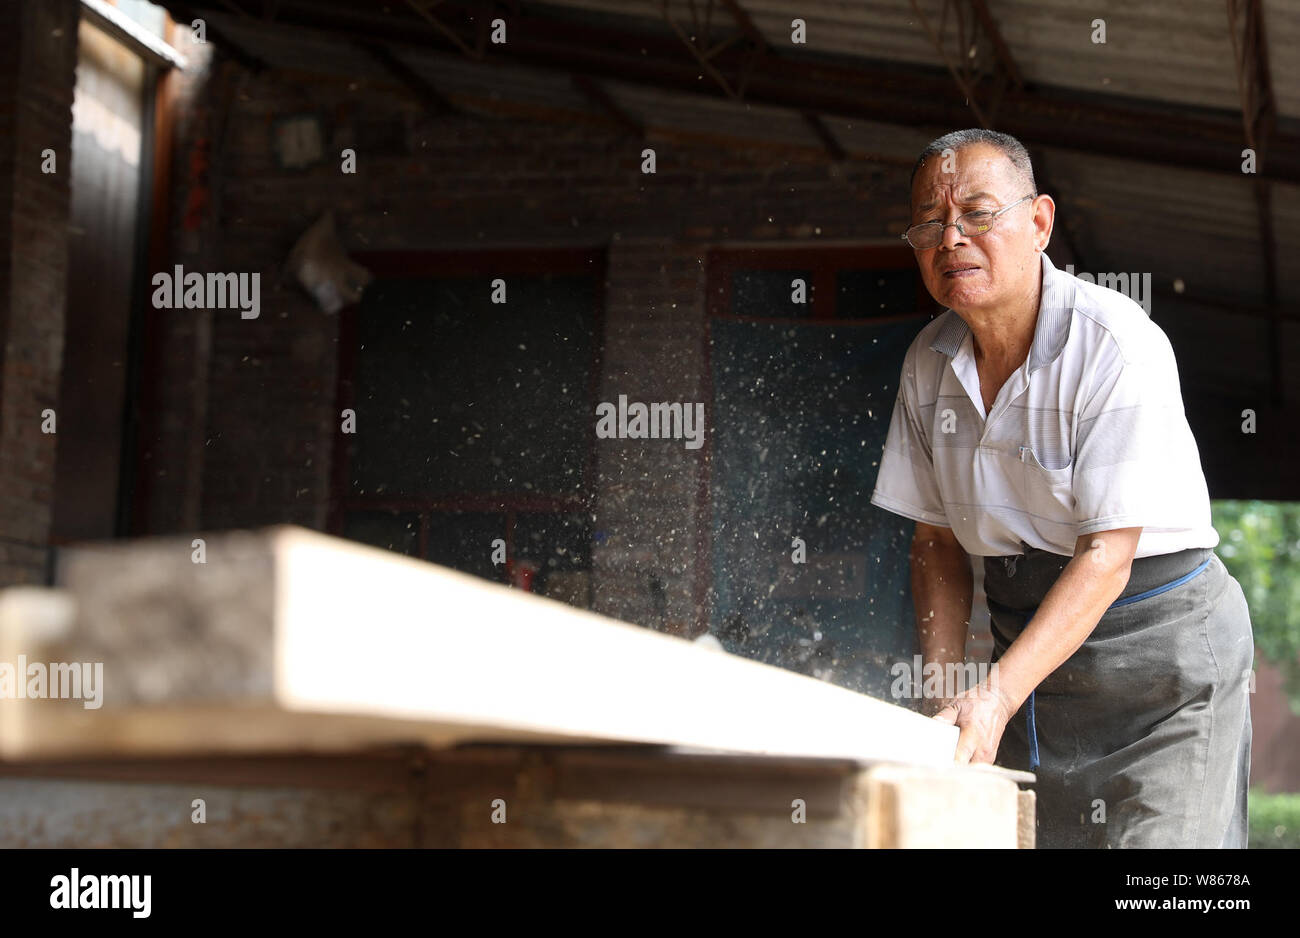 (190808) -- SHIJIAZHUANG, Aug. 8, 2019 (Xinhua) -- Han Baoyuan cuts a piece of wood in Hengxi Village of Jingxing mining area in Shijiazhuang, capital of north China's Hebei Province, Aug. 7, 2019. Han Baoyuan, a 70-year-old craftsman, is an inheritor of Jingxing traditional skill of building and repairing wood components of architectures. Han has been devoting himself to the career since he was 13, and completed numerous works featuring elegant ancient style. The skill passed down from the Qing Dynasty (1644-1911) has been listed in the seventh batch of municipal-level intangible cultural her Stock Photo